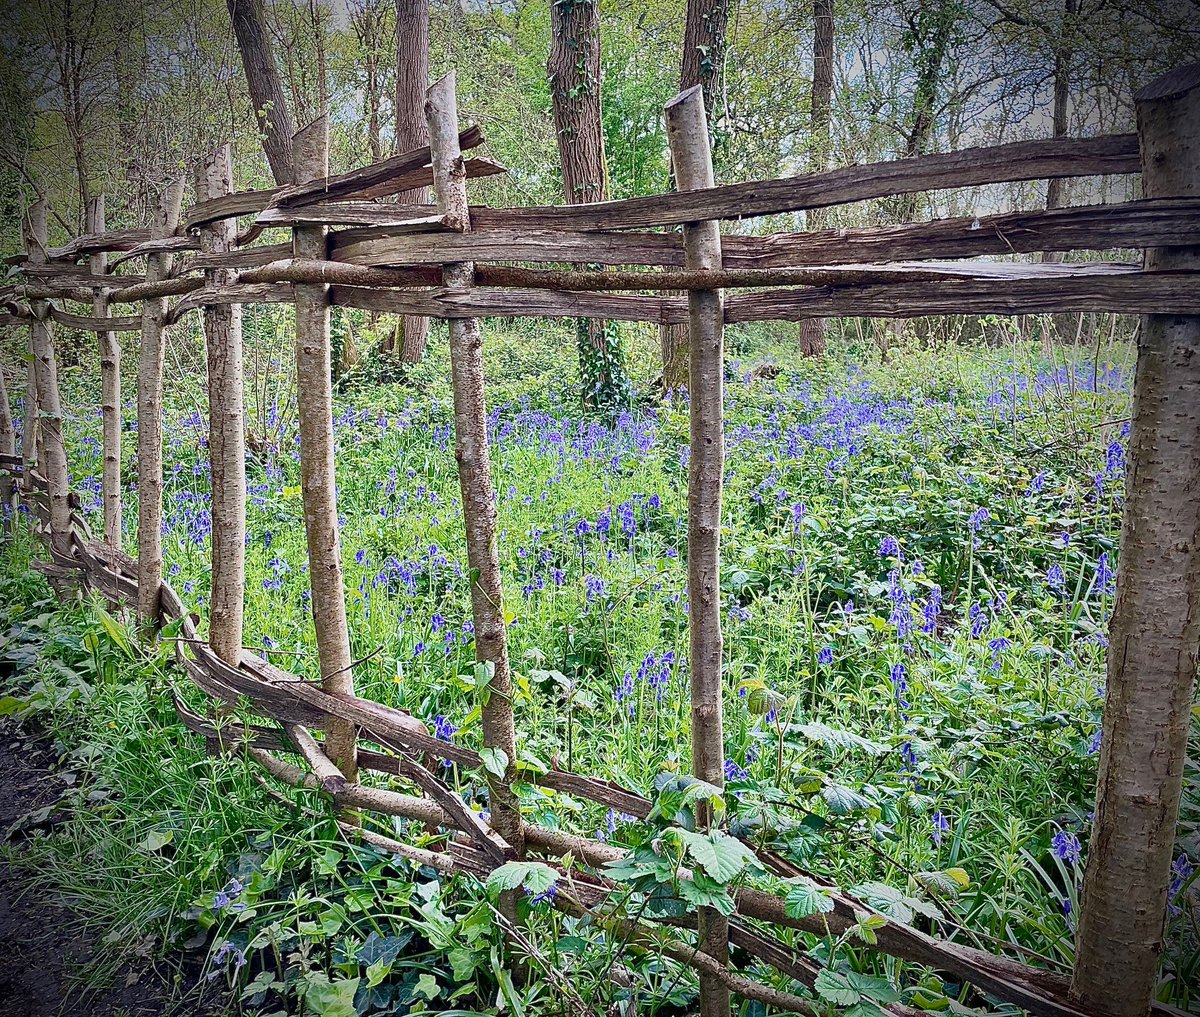 A carpet of blue... 💙💙💙 Bluebells in Salterns Copse. This fence was built by the Friends of Chichester Harbour volunteers, on one of the regular work parties with our rangers. Find out more about becoming a member here 👇 friendsch.org